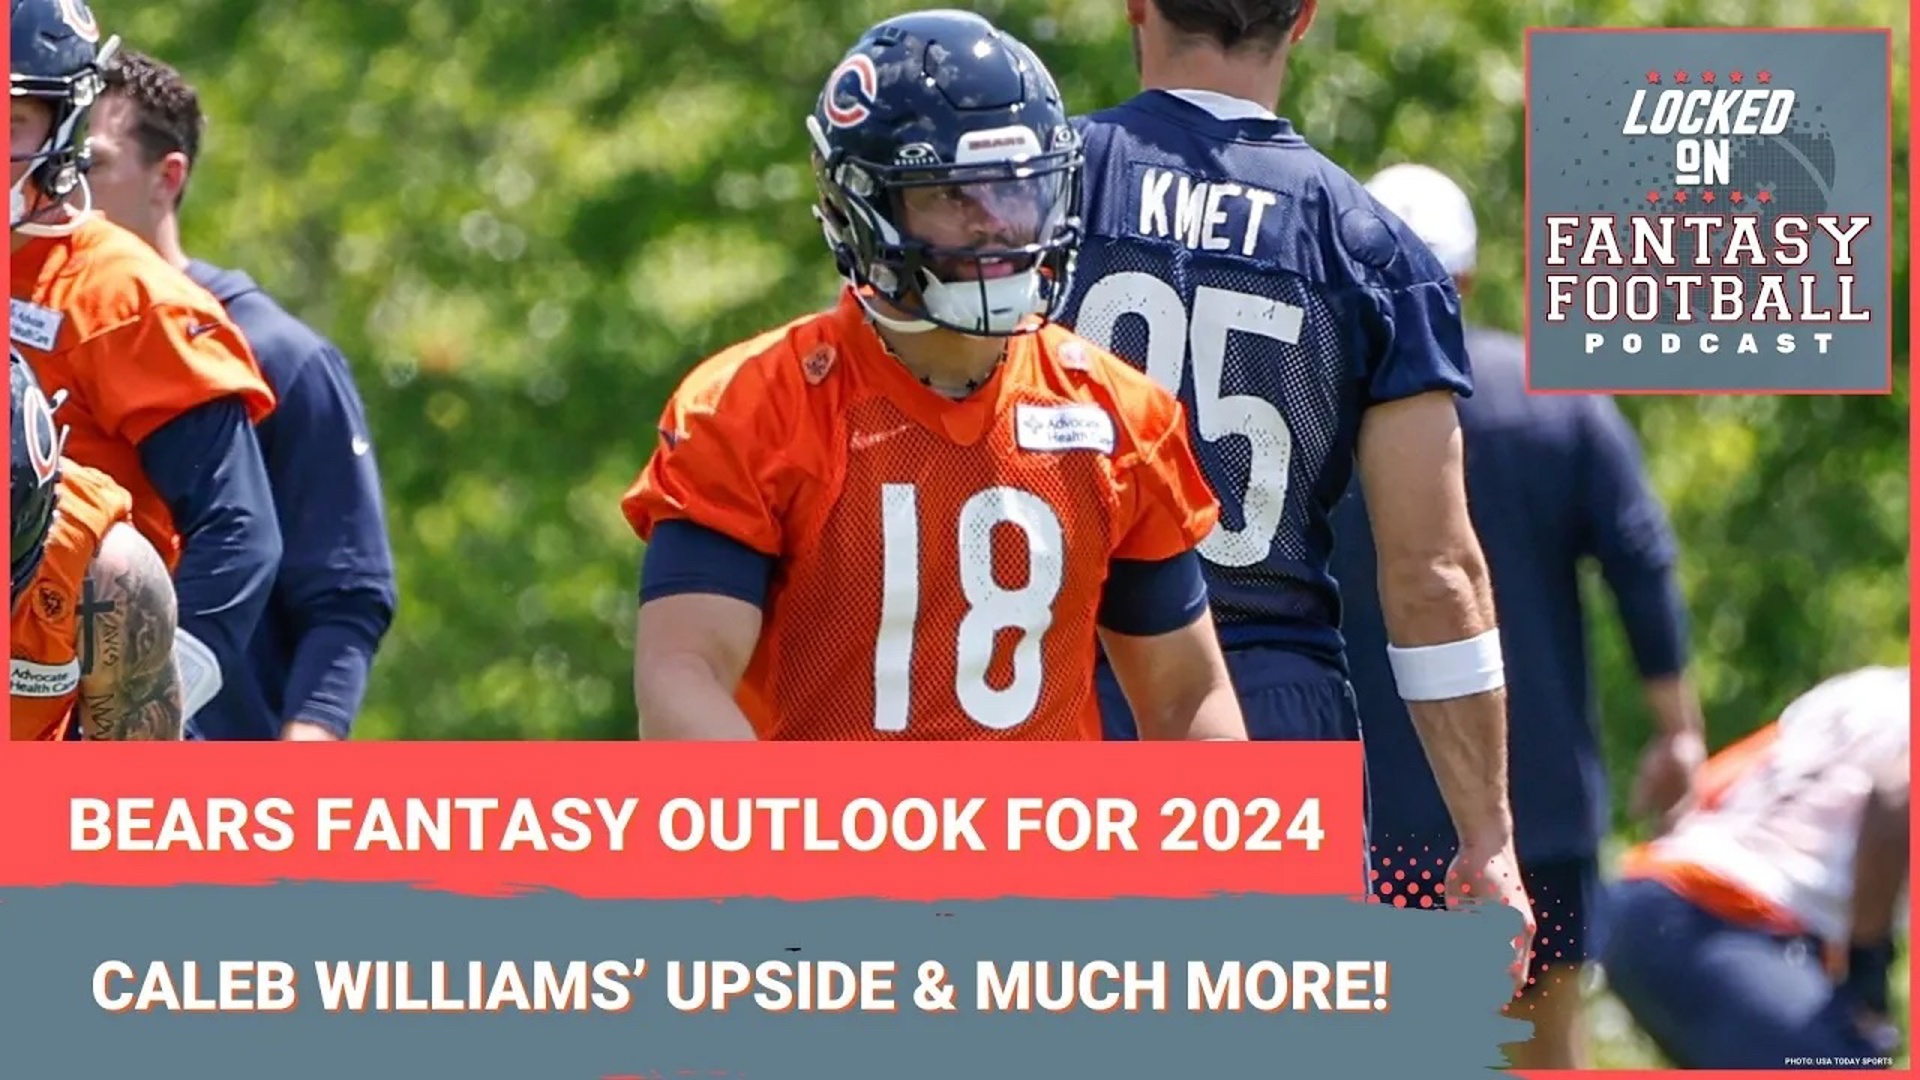 Sporting News.com's Vinnie Iyer and NFL.com's Michelle Magdziuk break down the fantasy football potential of the 2024 Chicago Bears.